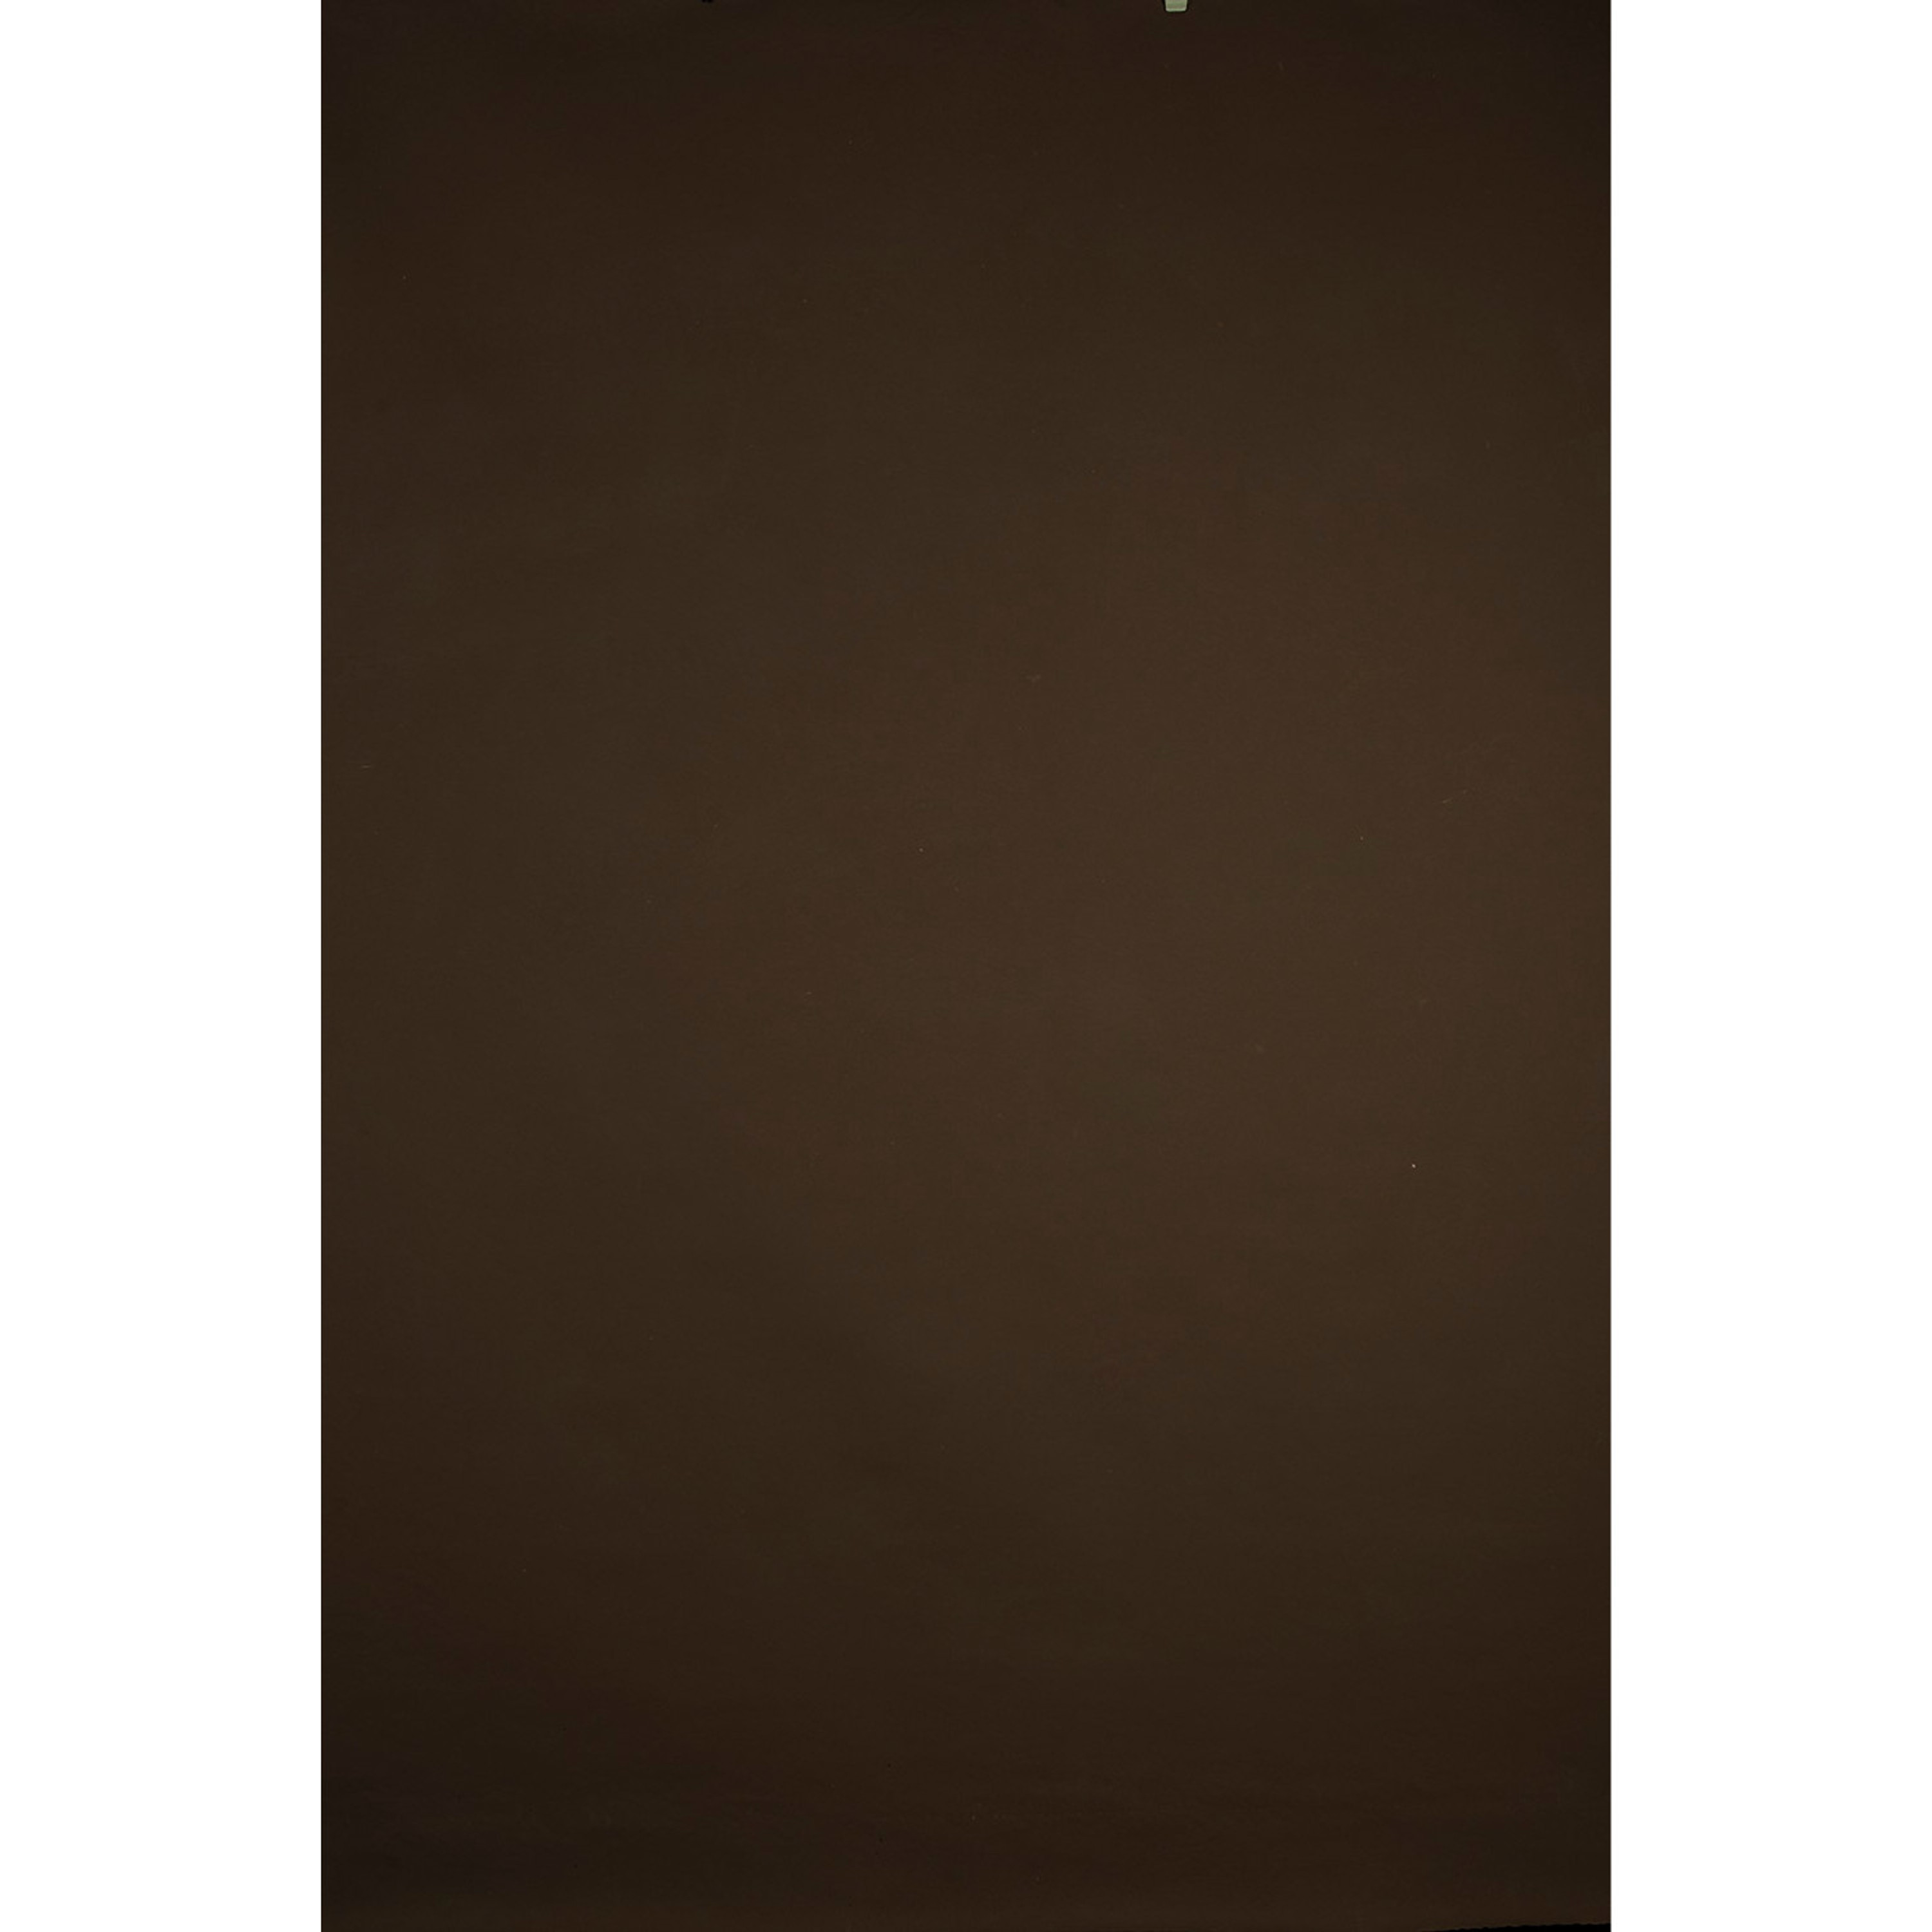 Gravity Backdrops Brown Mid Texture LG (SN: 8622)